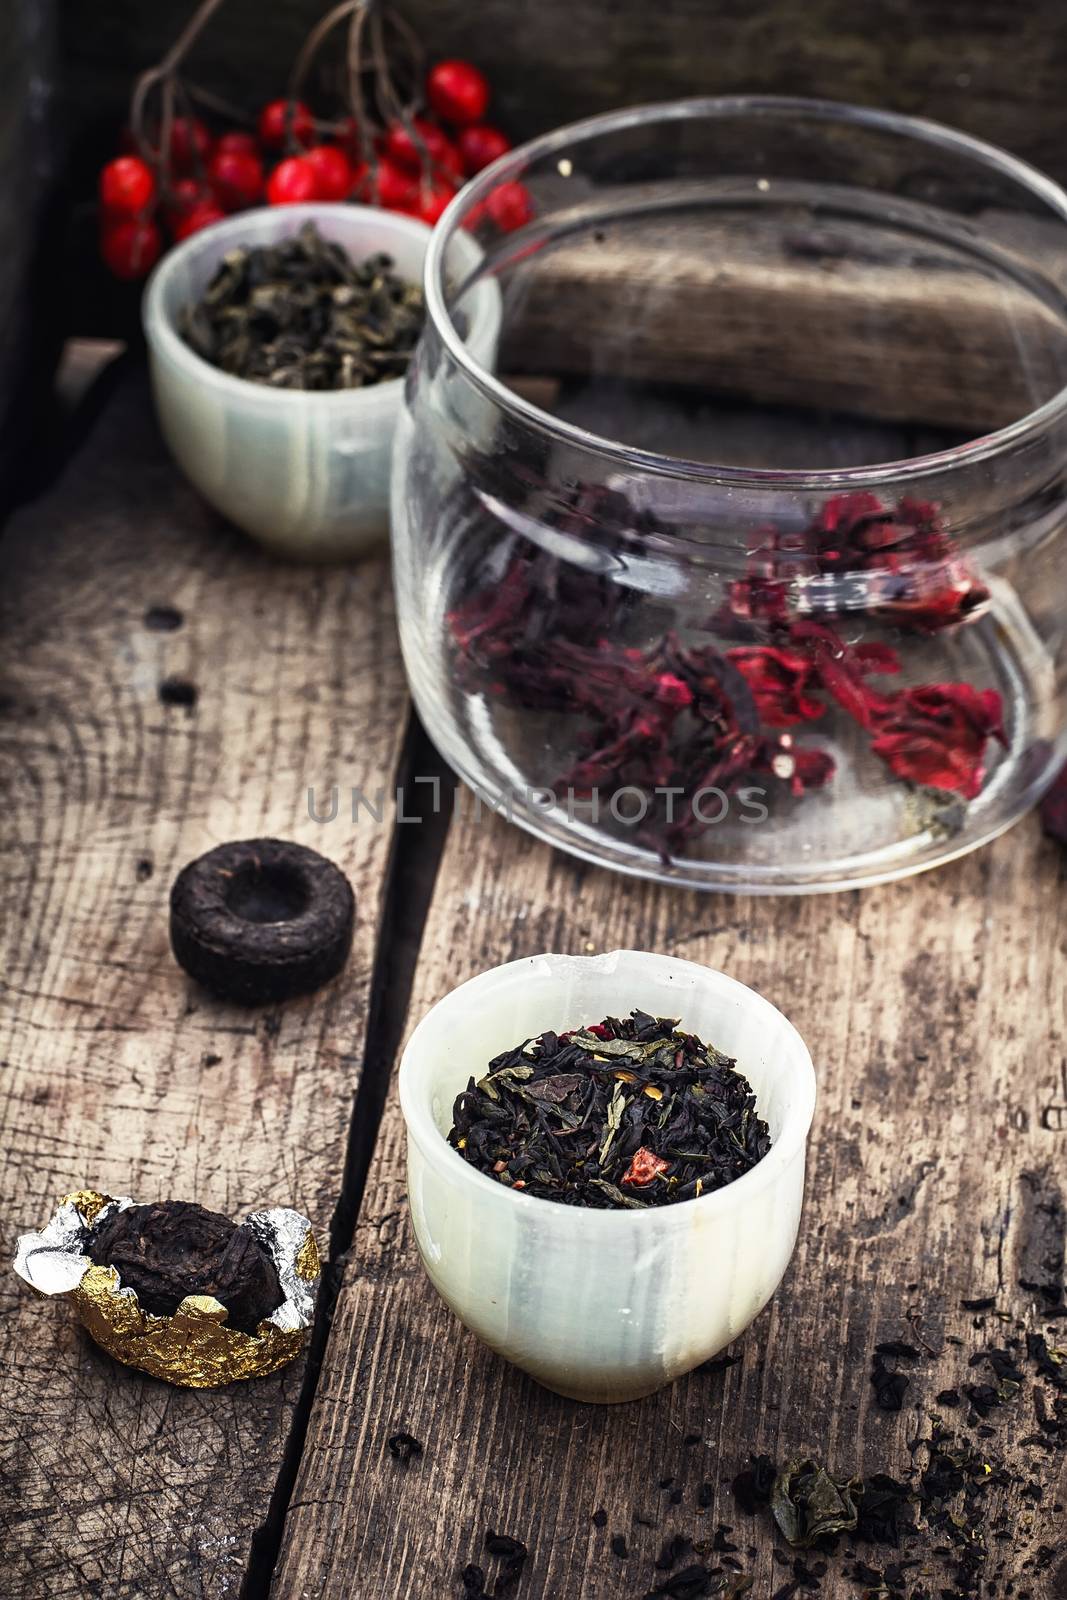 tea leaves for brewing by LMykola